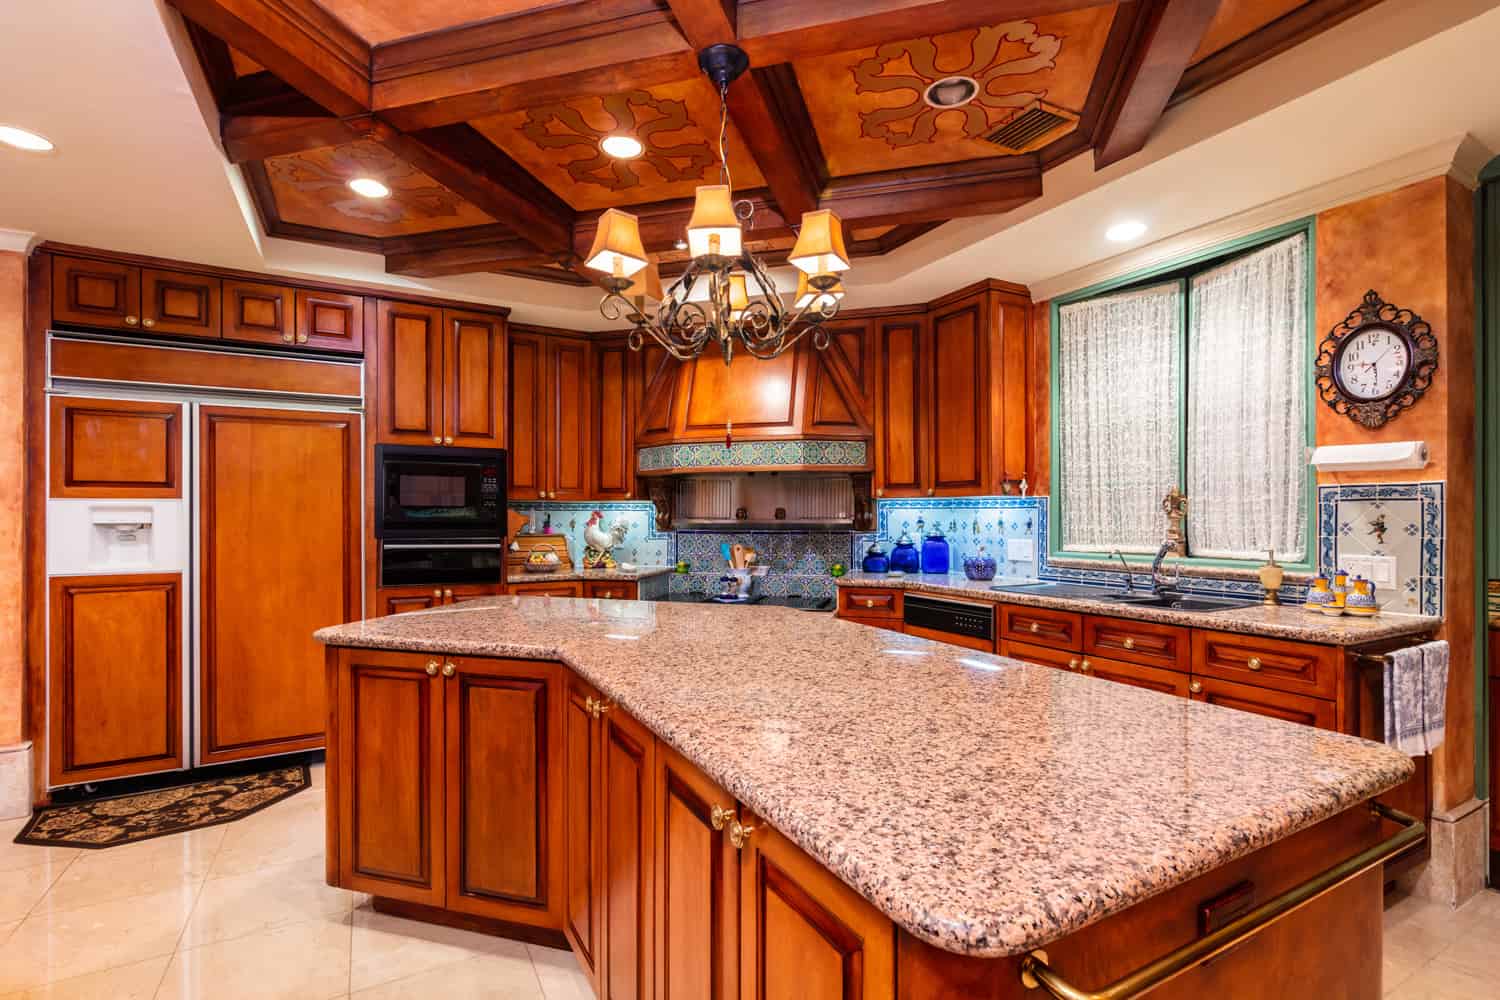 Beautiful luxury home kitchen with red cherry wood cabinets.